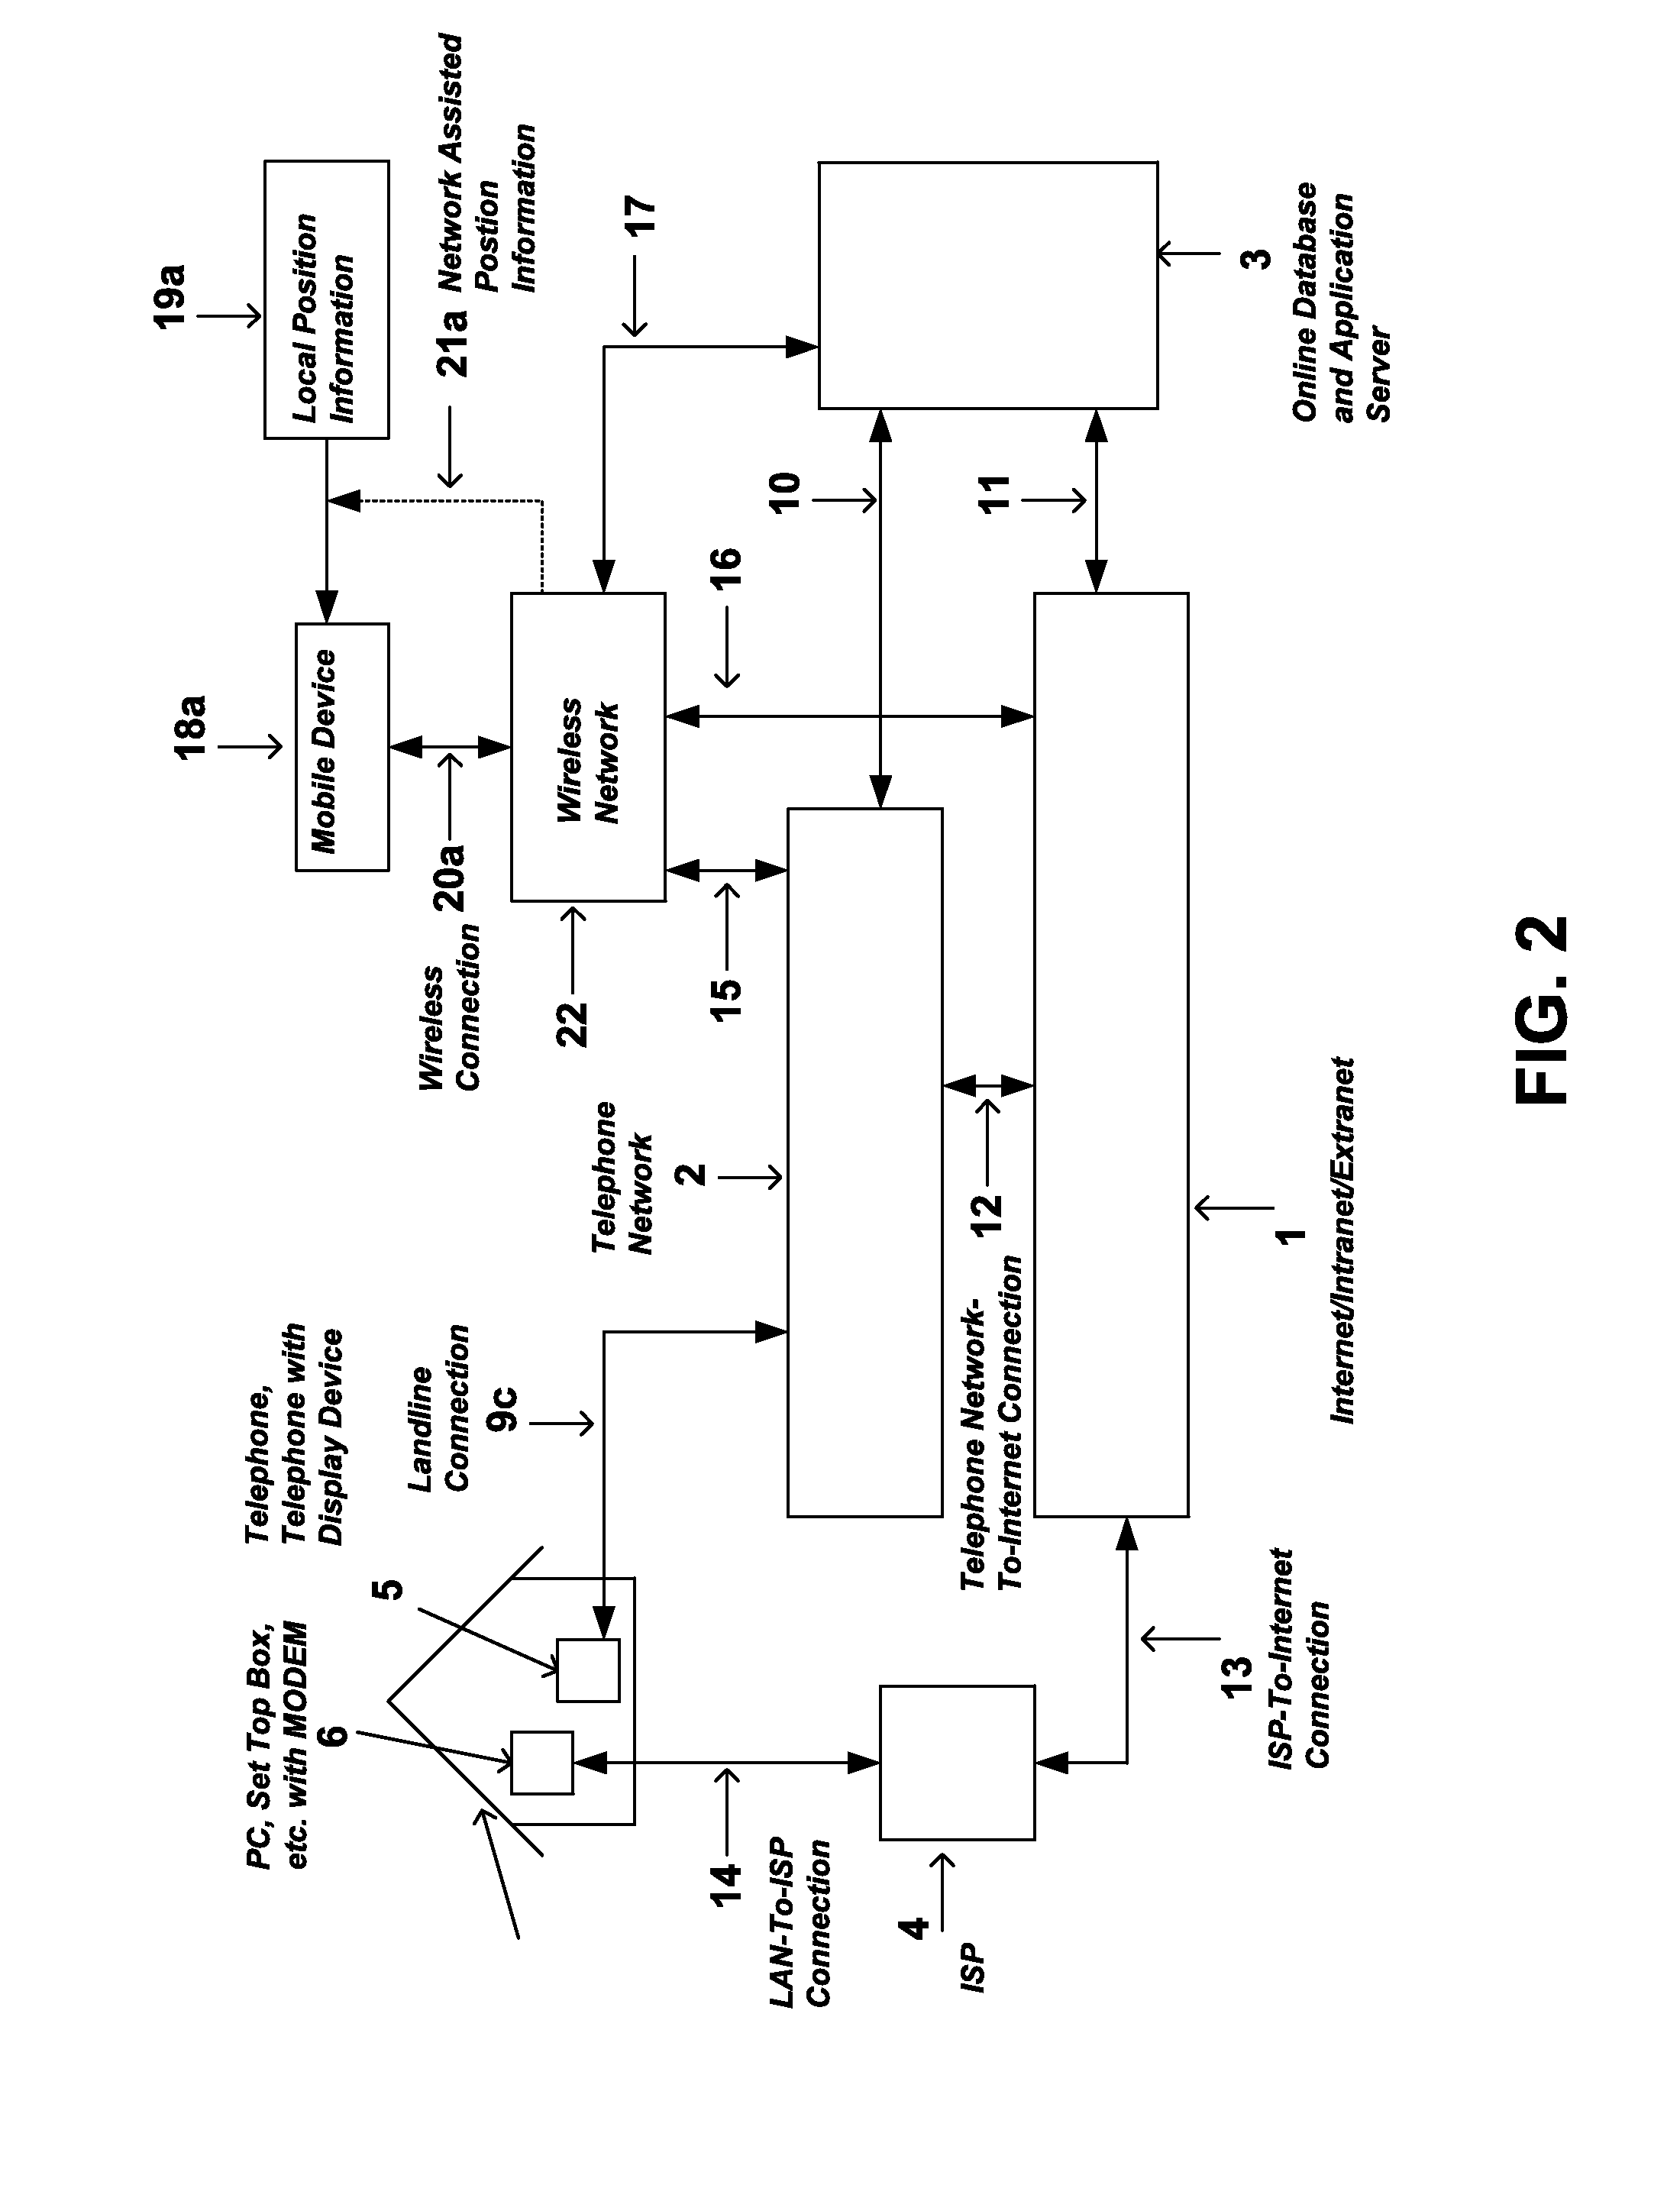 System and method for providing routing, mapping, and relative position information to users of a communication network